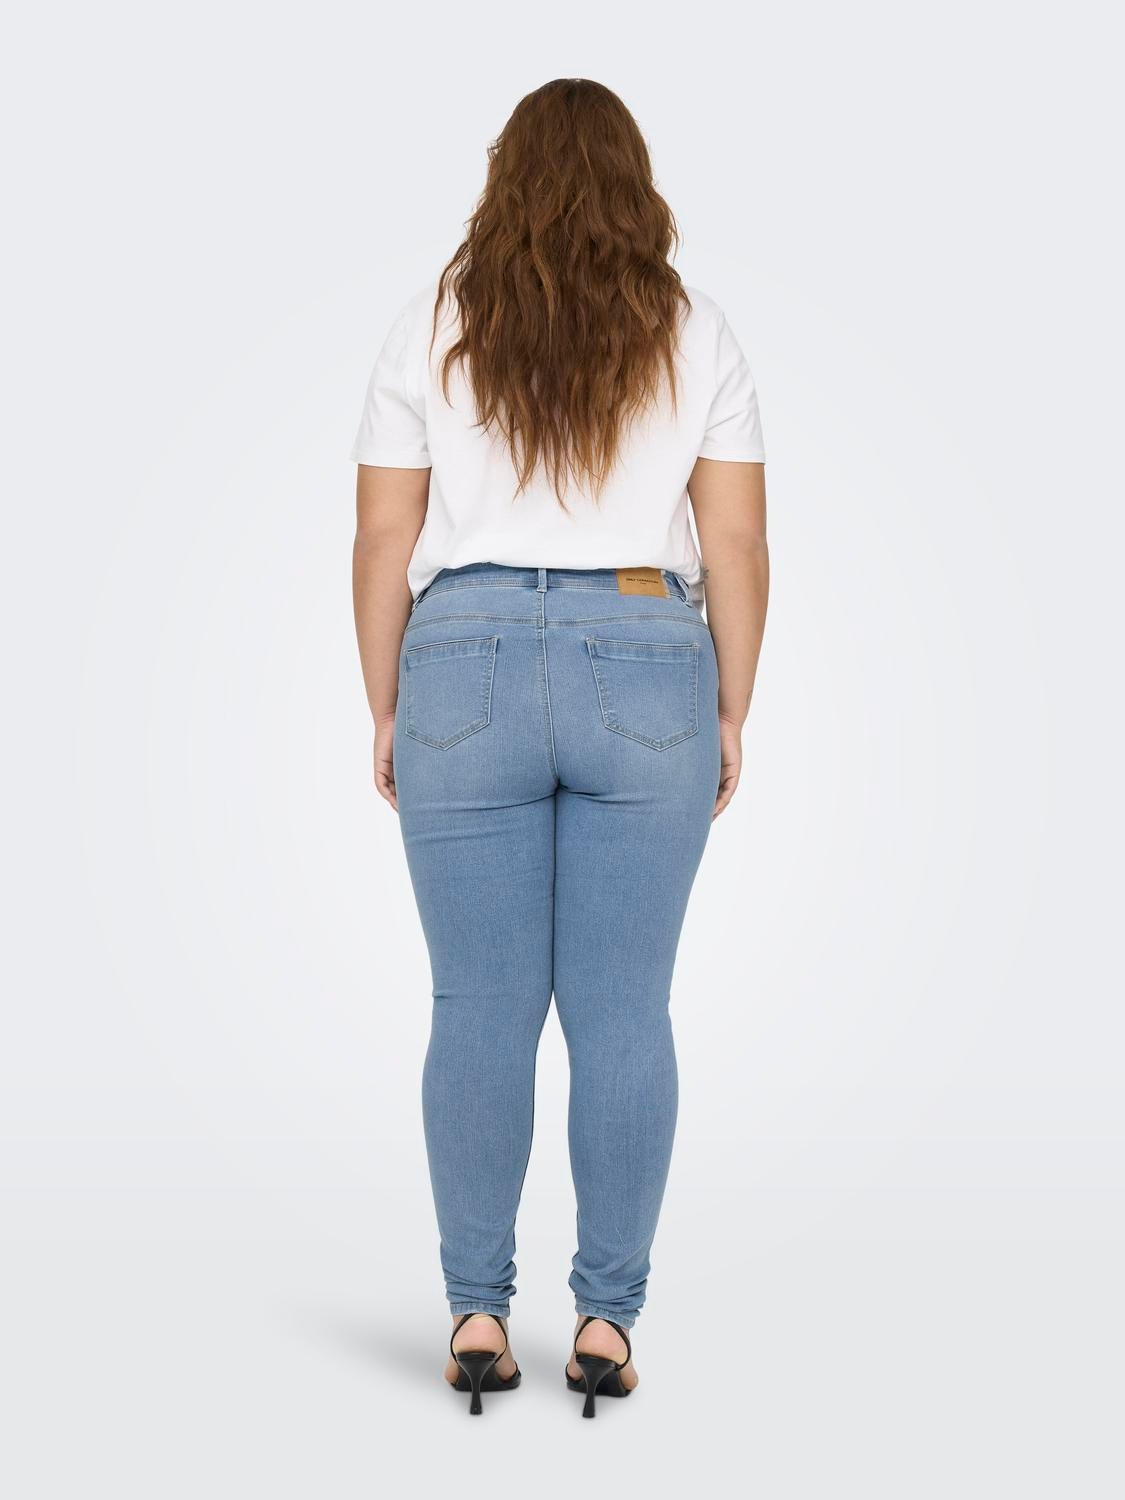 ONLY Jeans Skinny Fit Taille moyenne Curve -Light Medium Blue Denim - 15263098